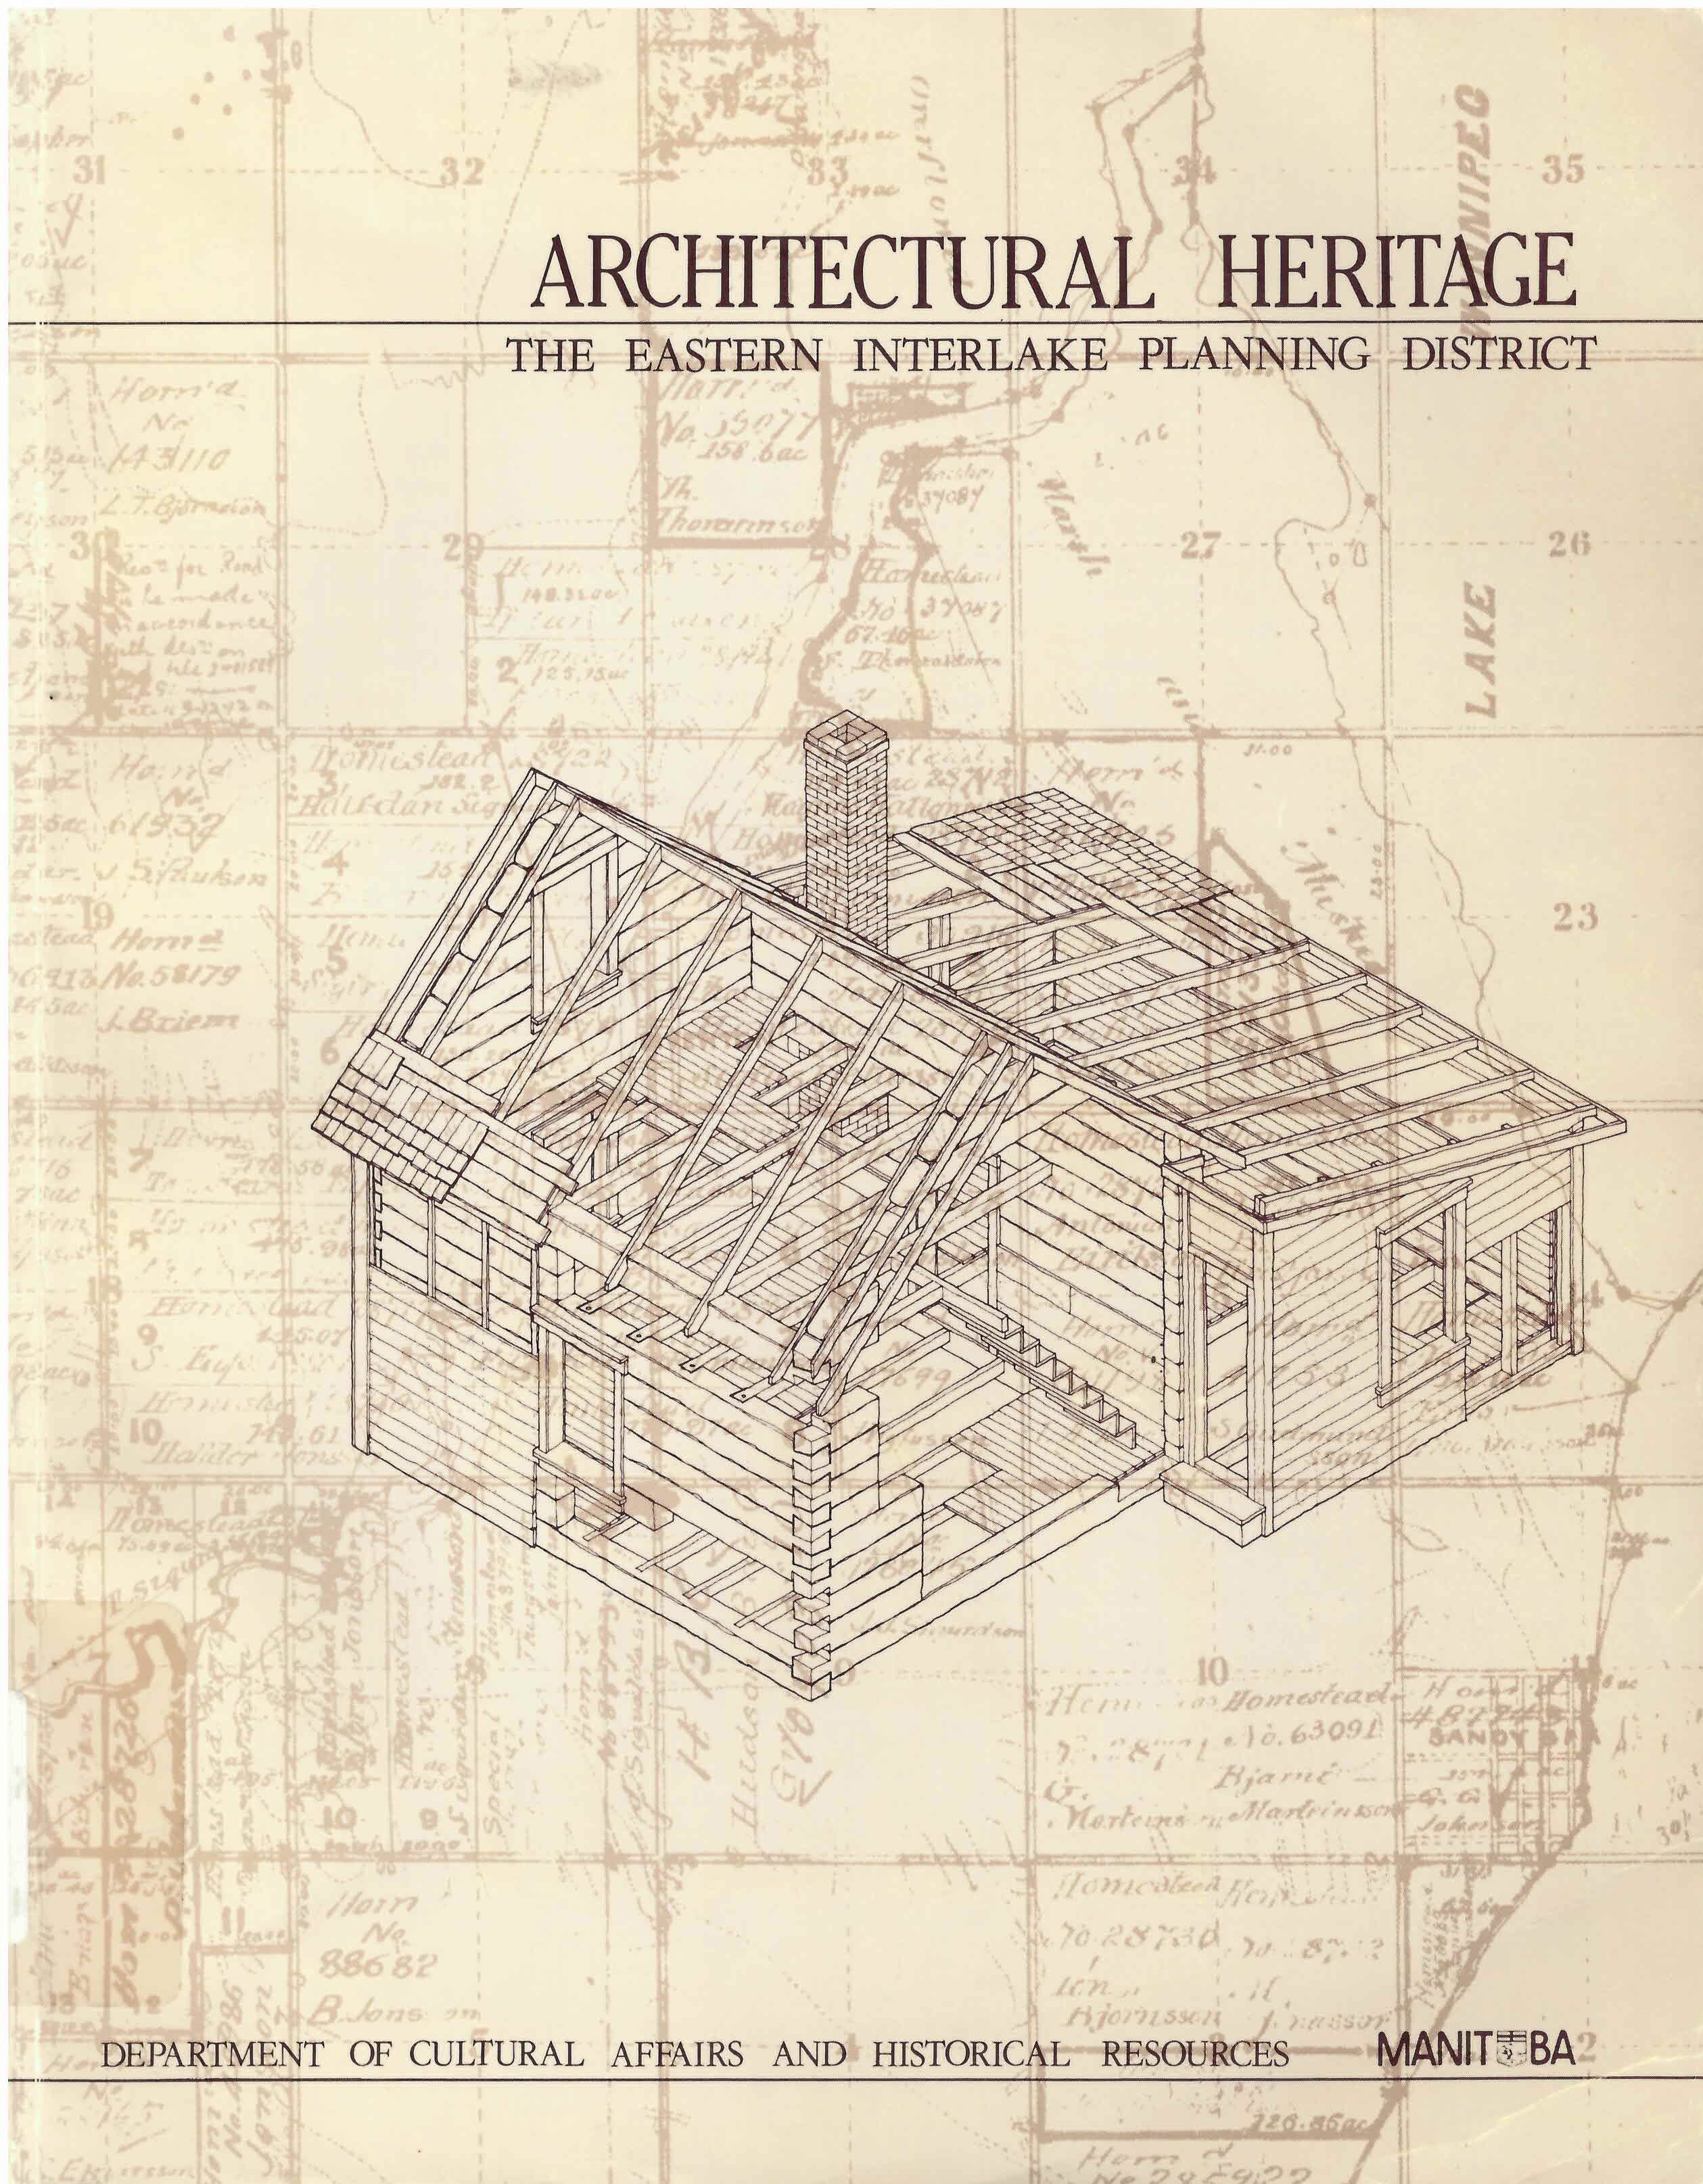 Architectural heritage, the Eastern Interlake Planning District